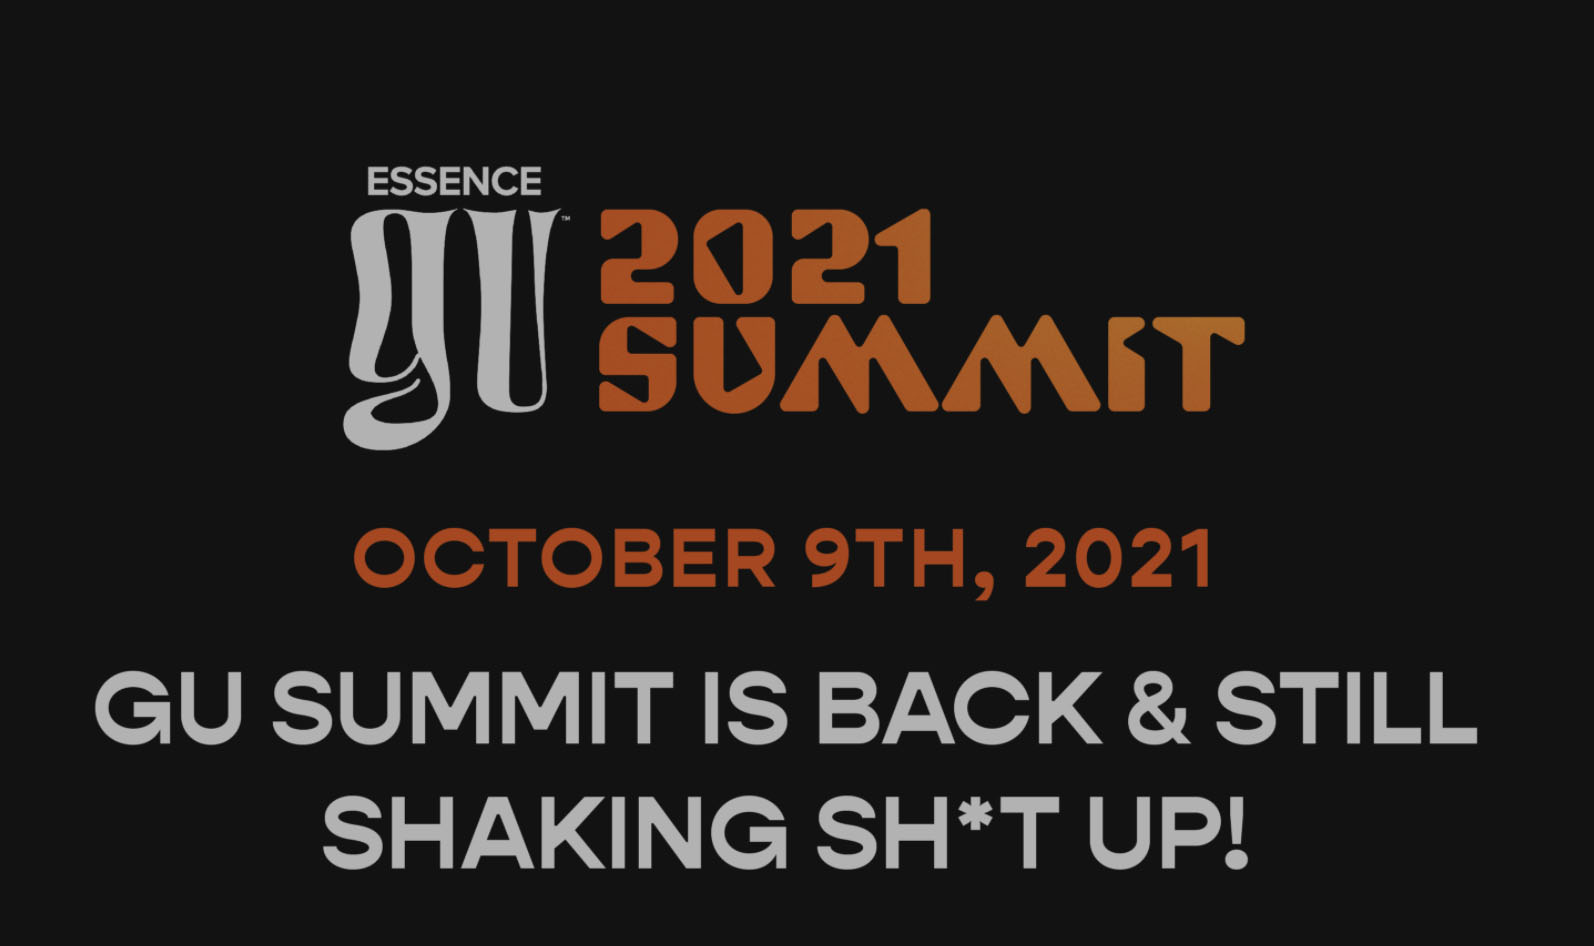 It’s Not Too Late To Register For The 2021 GU Summit!